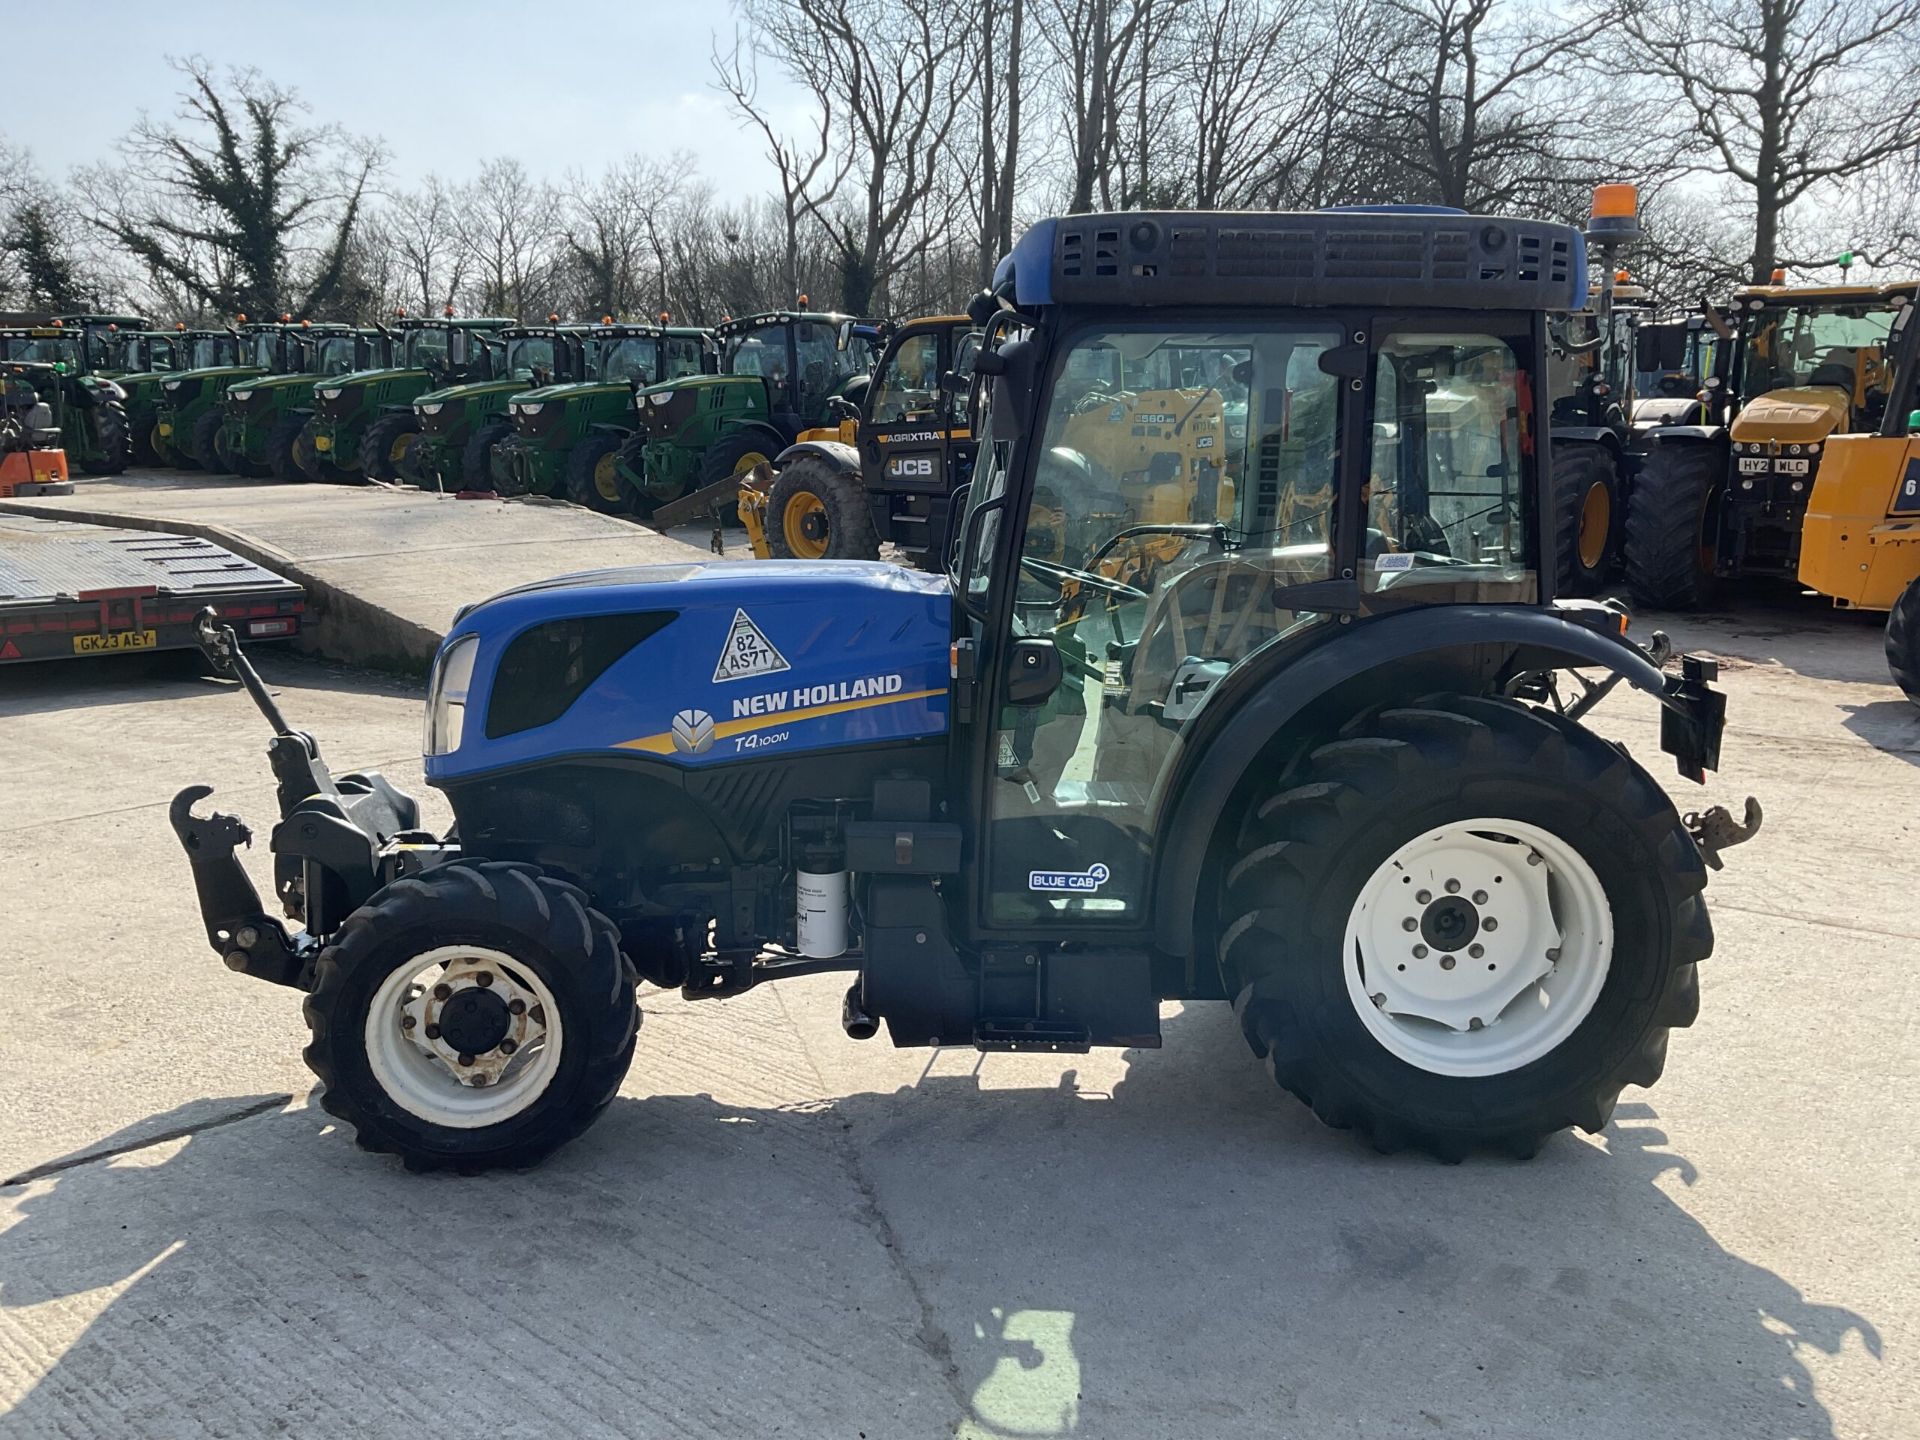 YEAR 2018 NEW HOLLAND T4.100N. FRONT LINKAGE. FRONT P.T.O. SUPER STEER. 3 SPOOLS. AIR CON